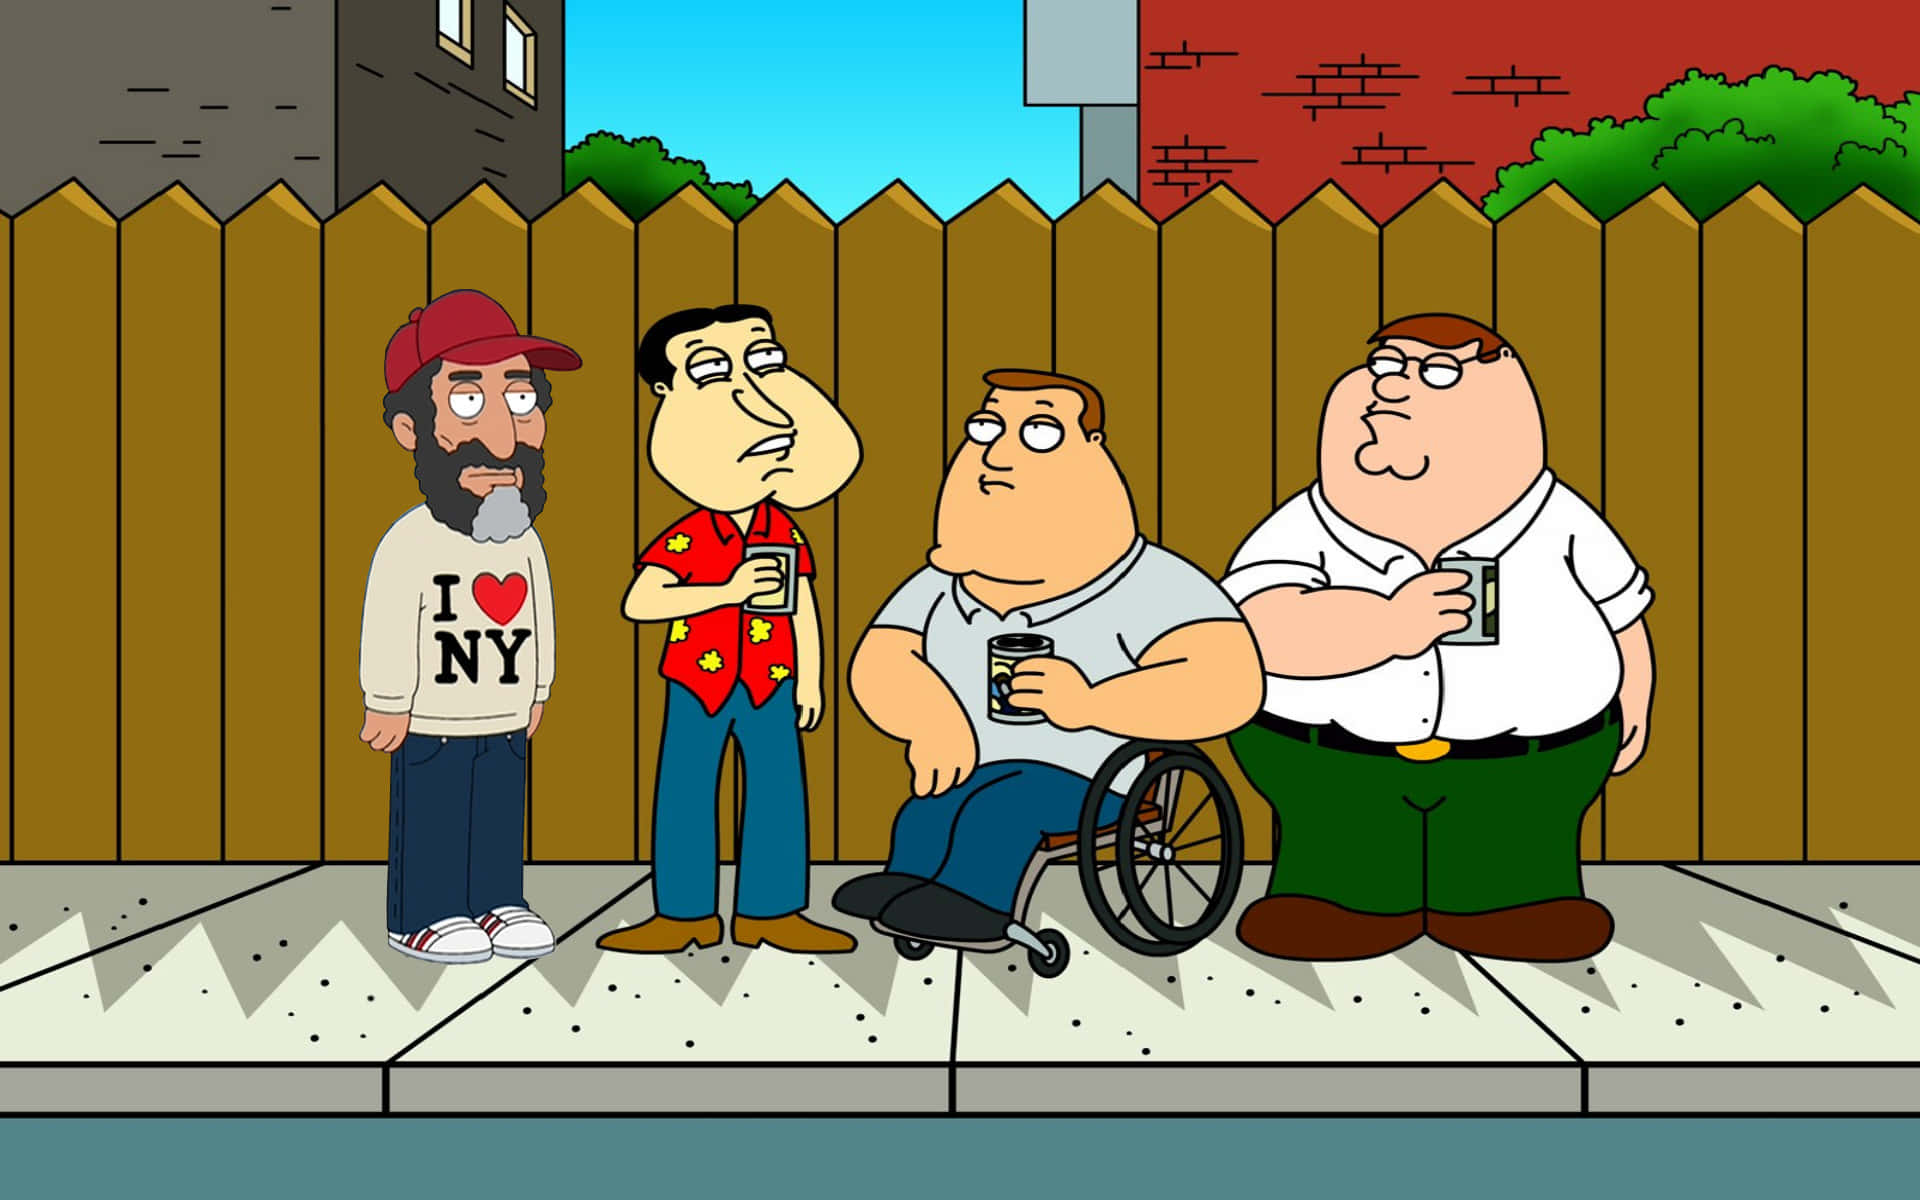 The Griffins from Family Guy